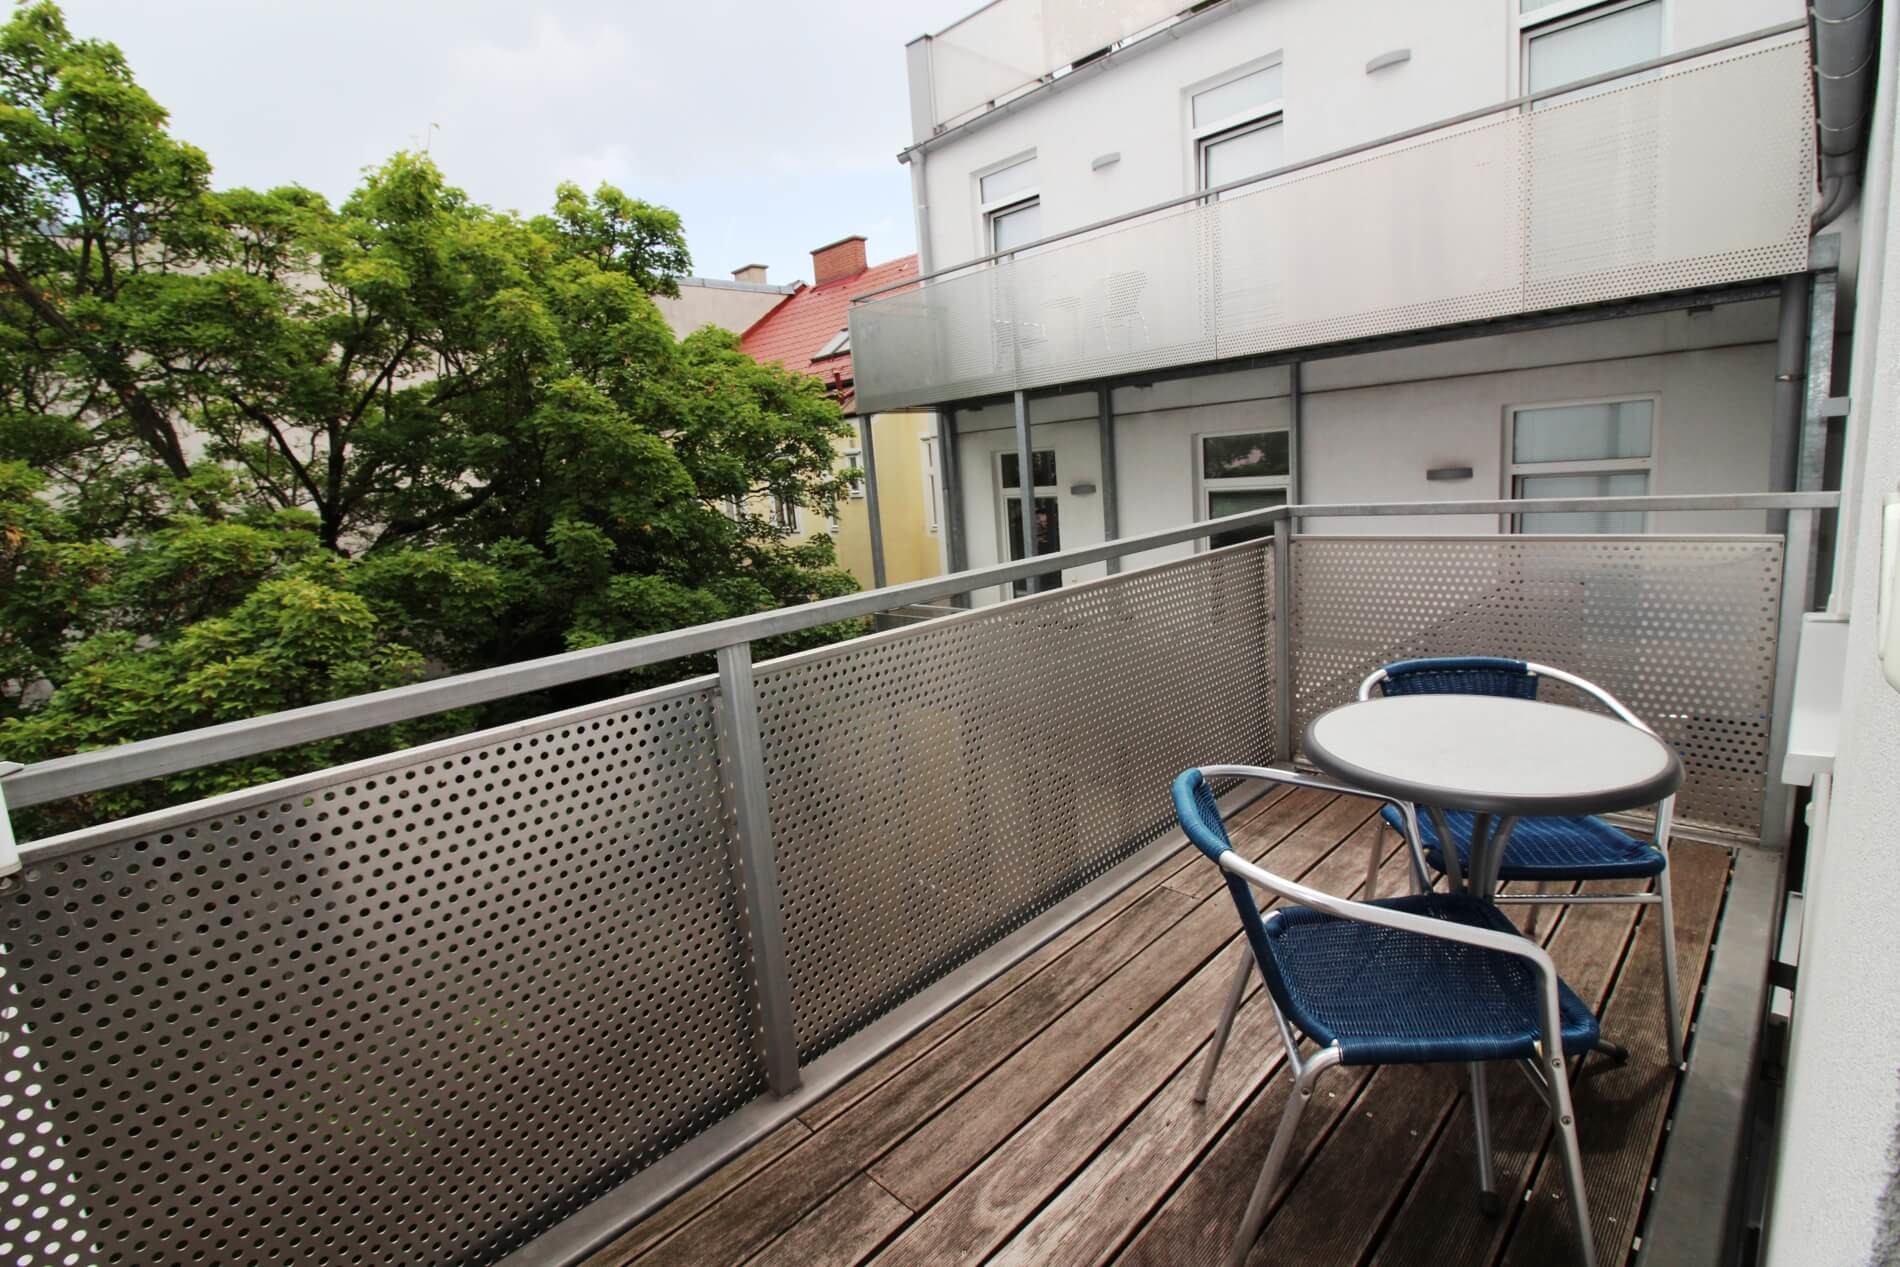 Completely furnished 2-bedroom apartment with Balcony in Vienna (great location) 27